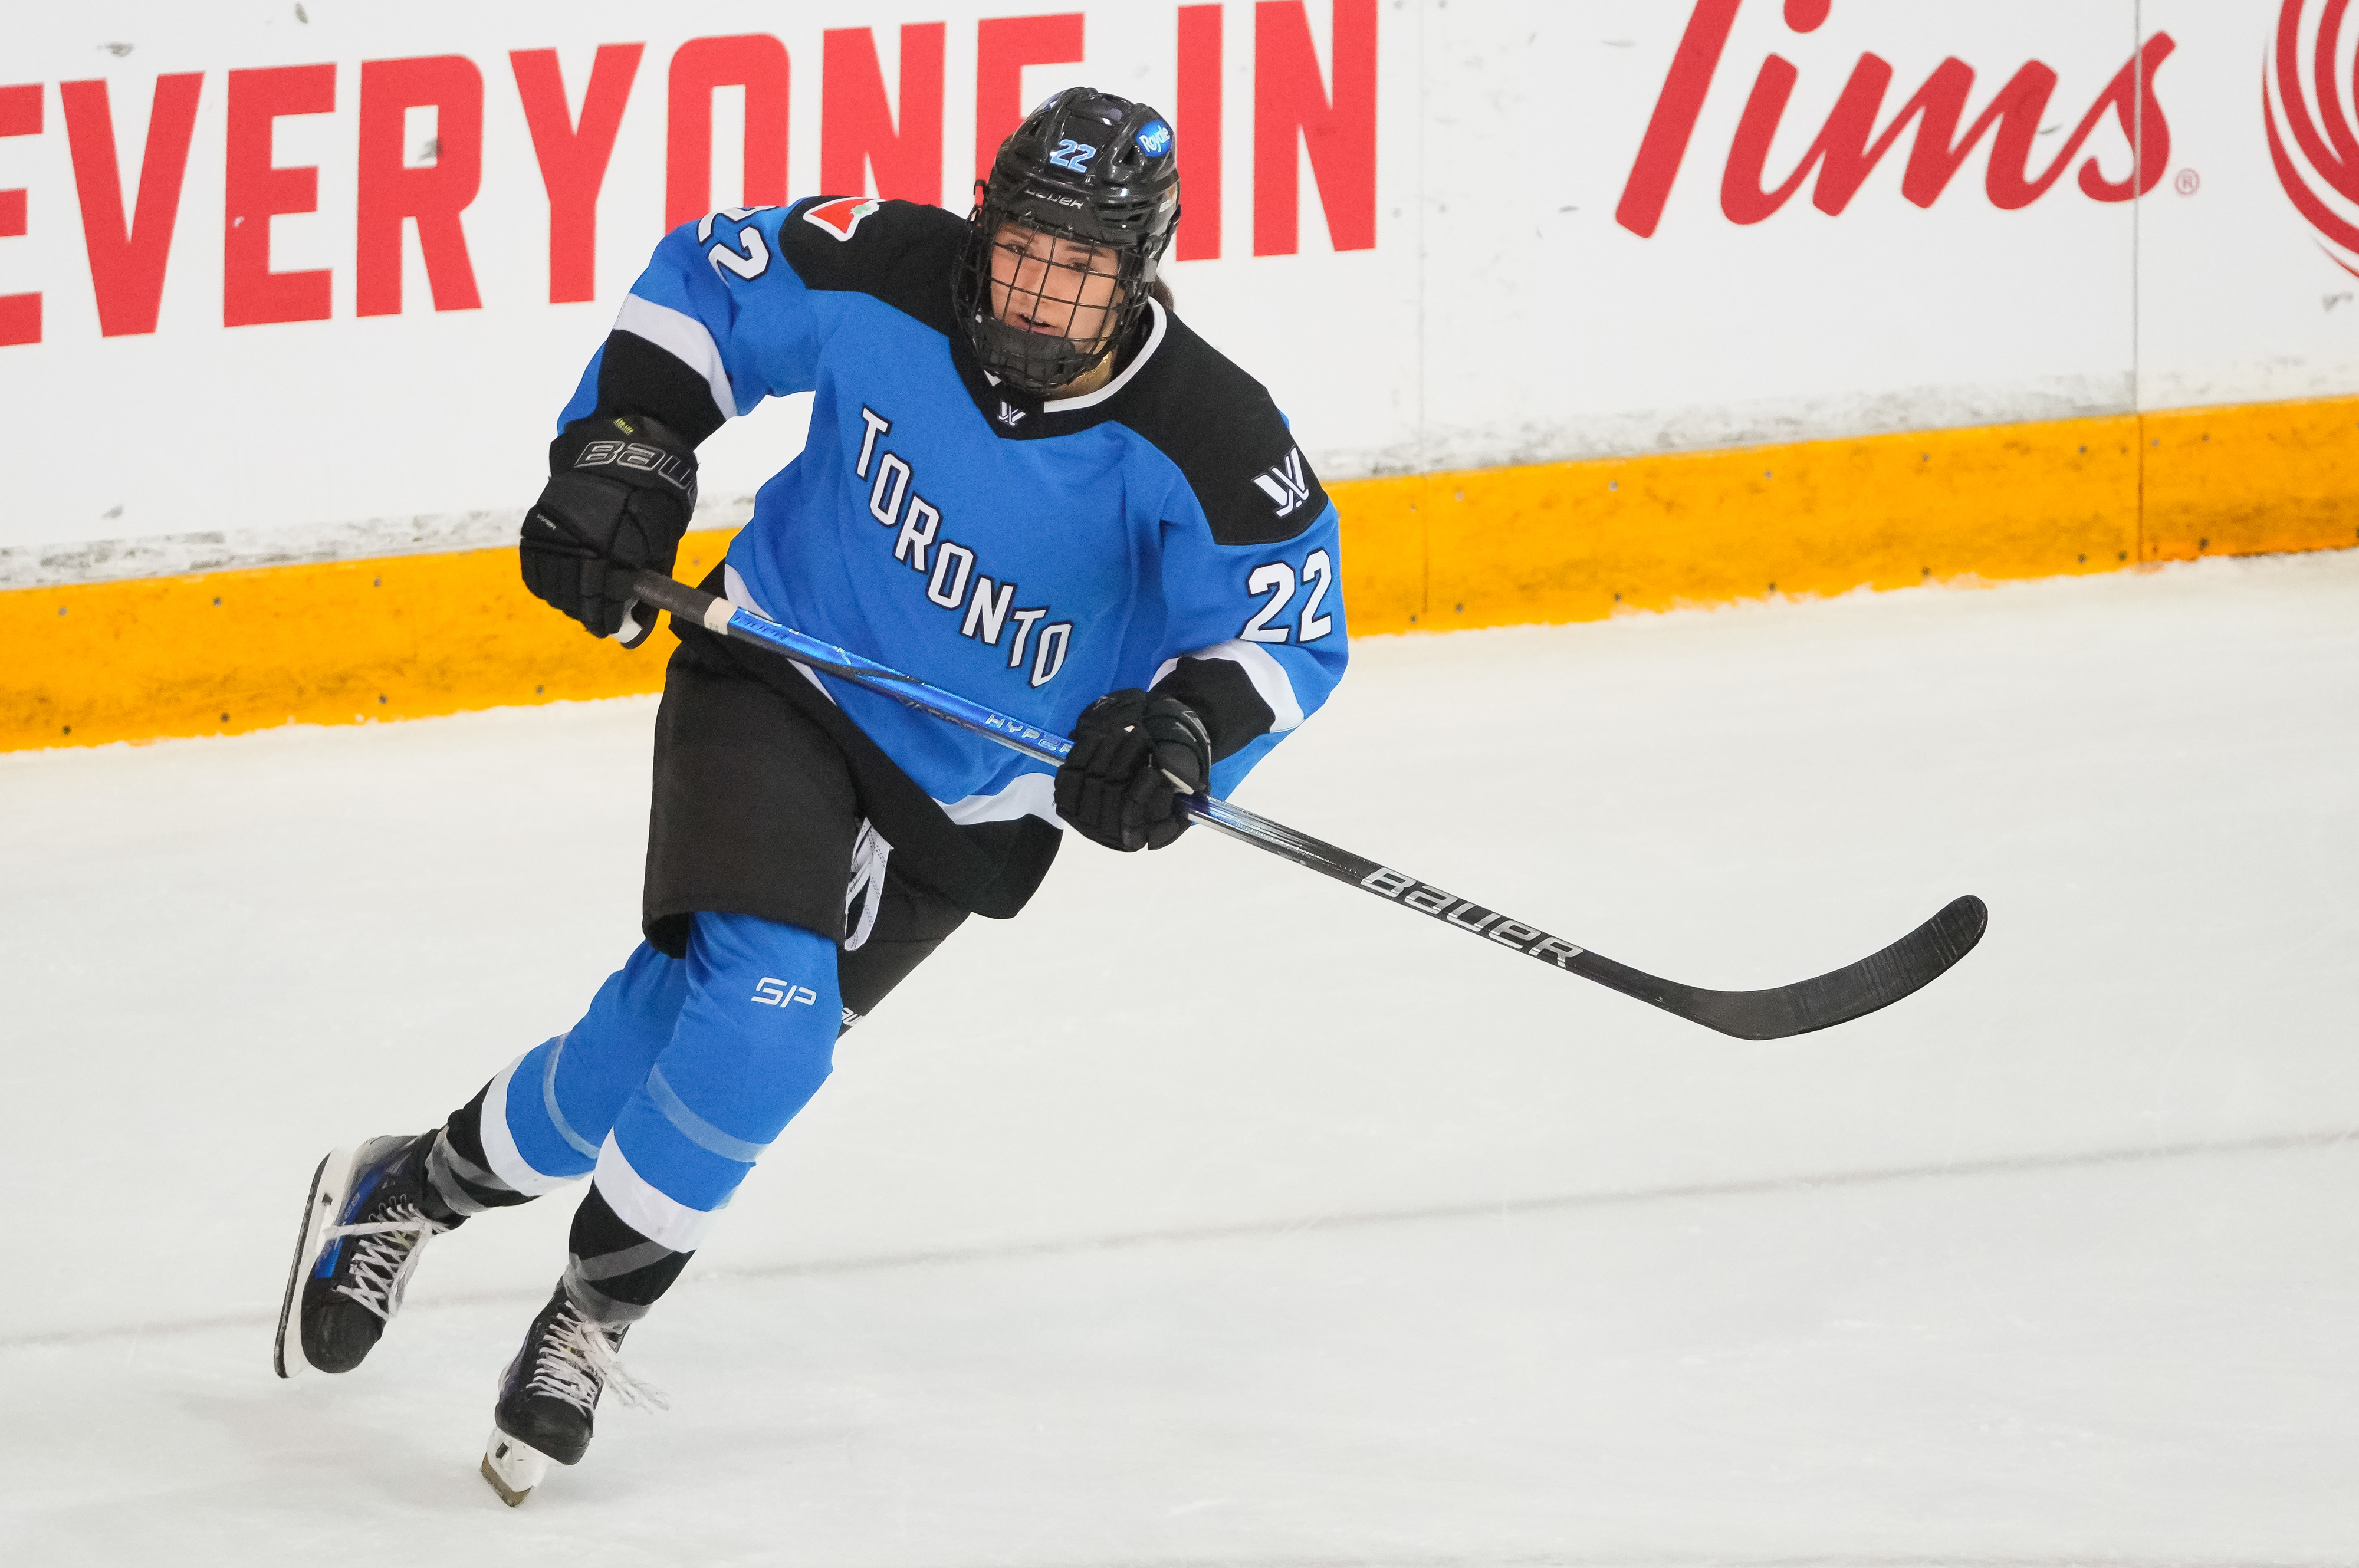 Hockey player in action during a game, wearing Toronto&#x27;s blue and white uniform, number 22